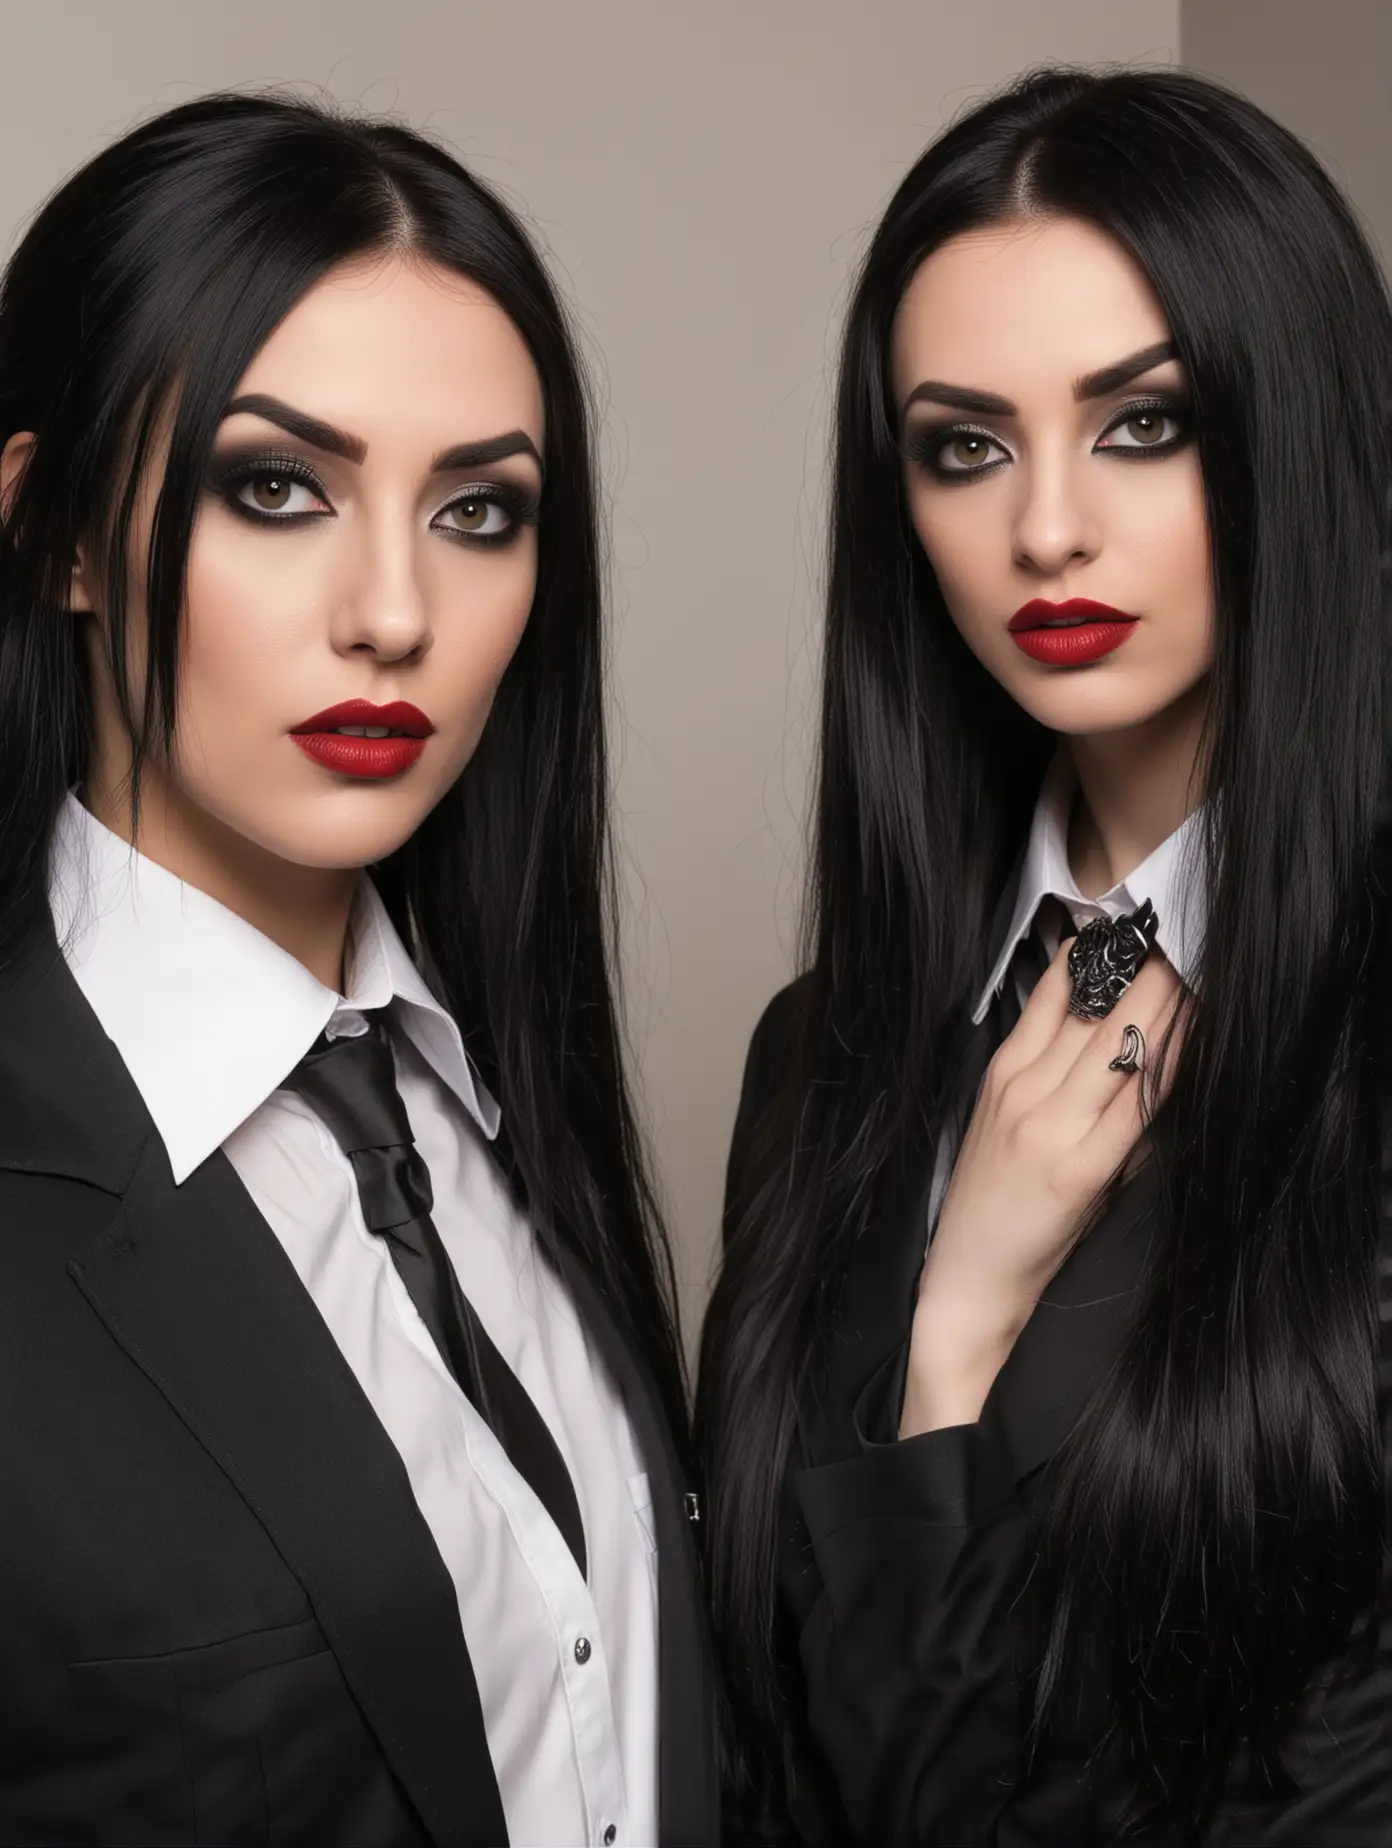 Boss and Secretary: Play out a scenario where one is the boss and the other is the secretary who has been working late. There is a lot of attraction between them. The boss is a blackmetalhead man and the secretary is a gothic woman but they both are dressed as business people but still with the black metal and gothic inspired way. Both have long black hair, smokey eye makeup. The woman has red lipstick and long black nails.